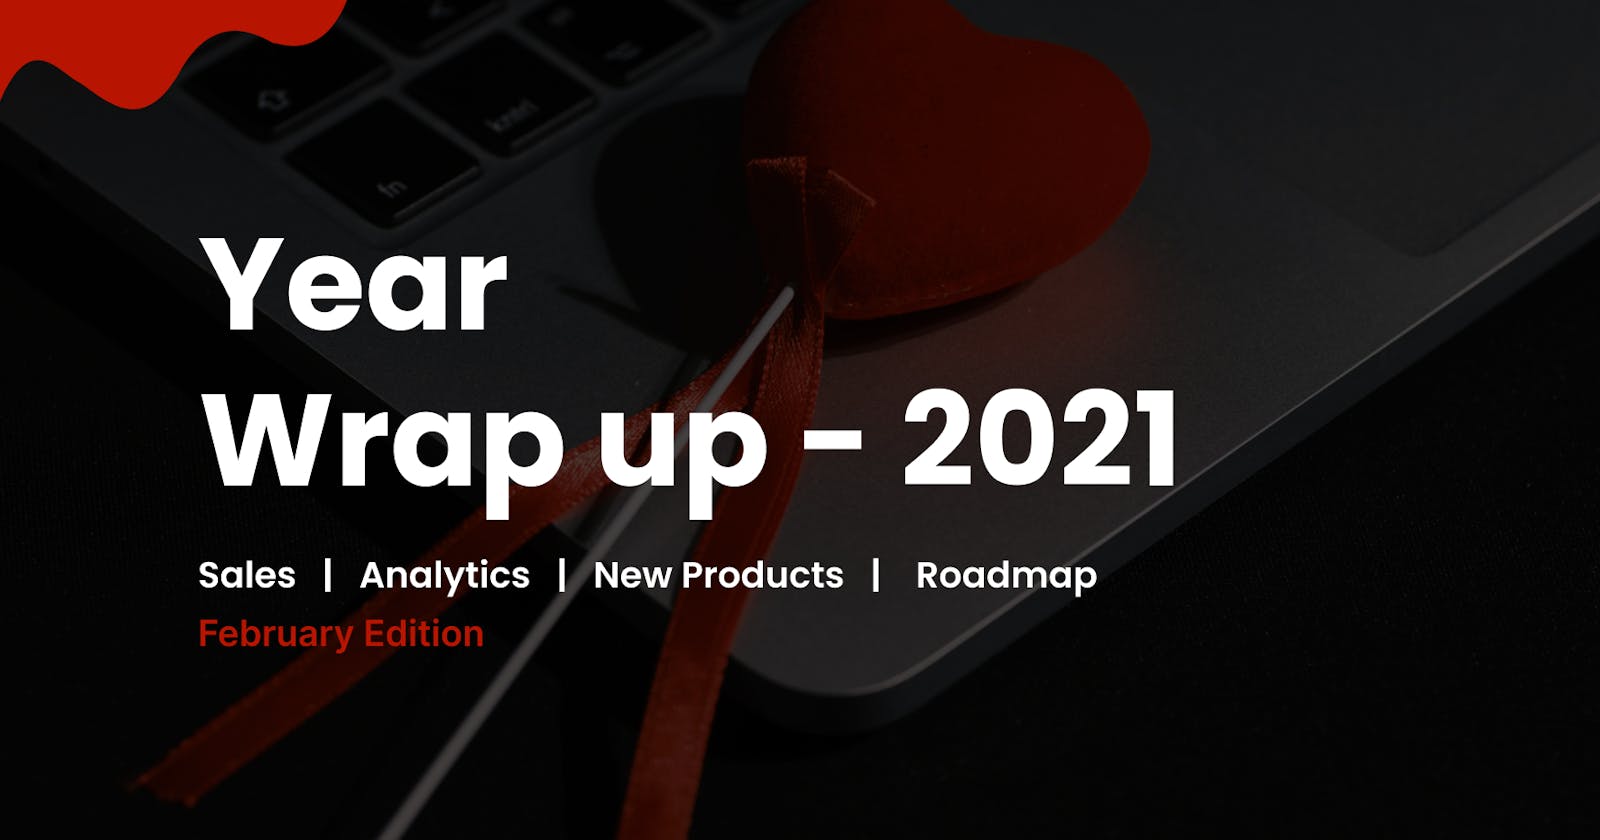 Year Wrap up 2021 - February Edition